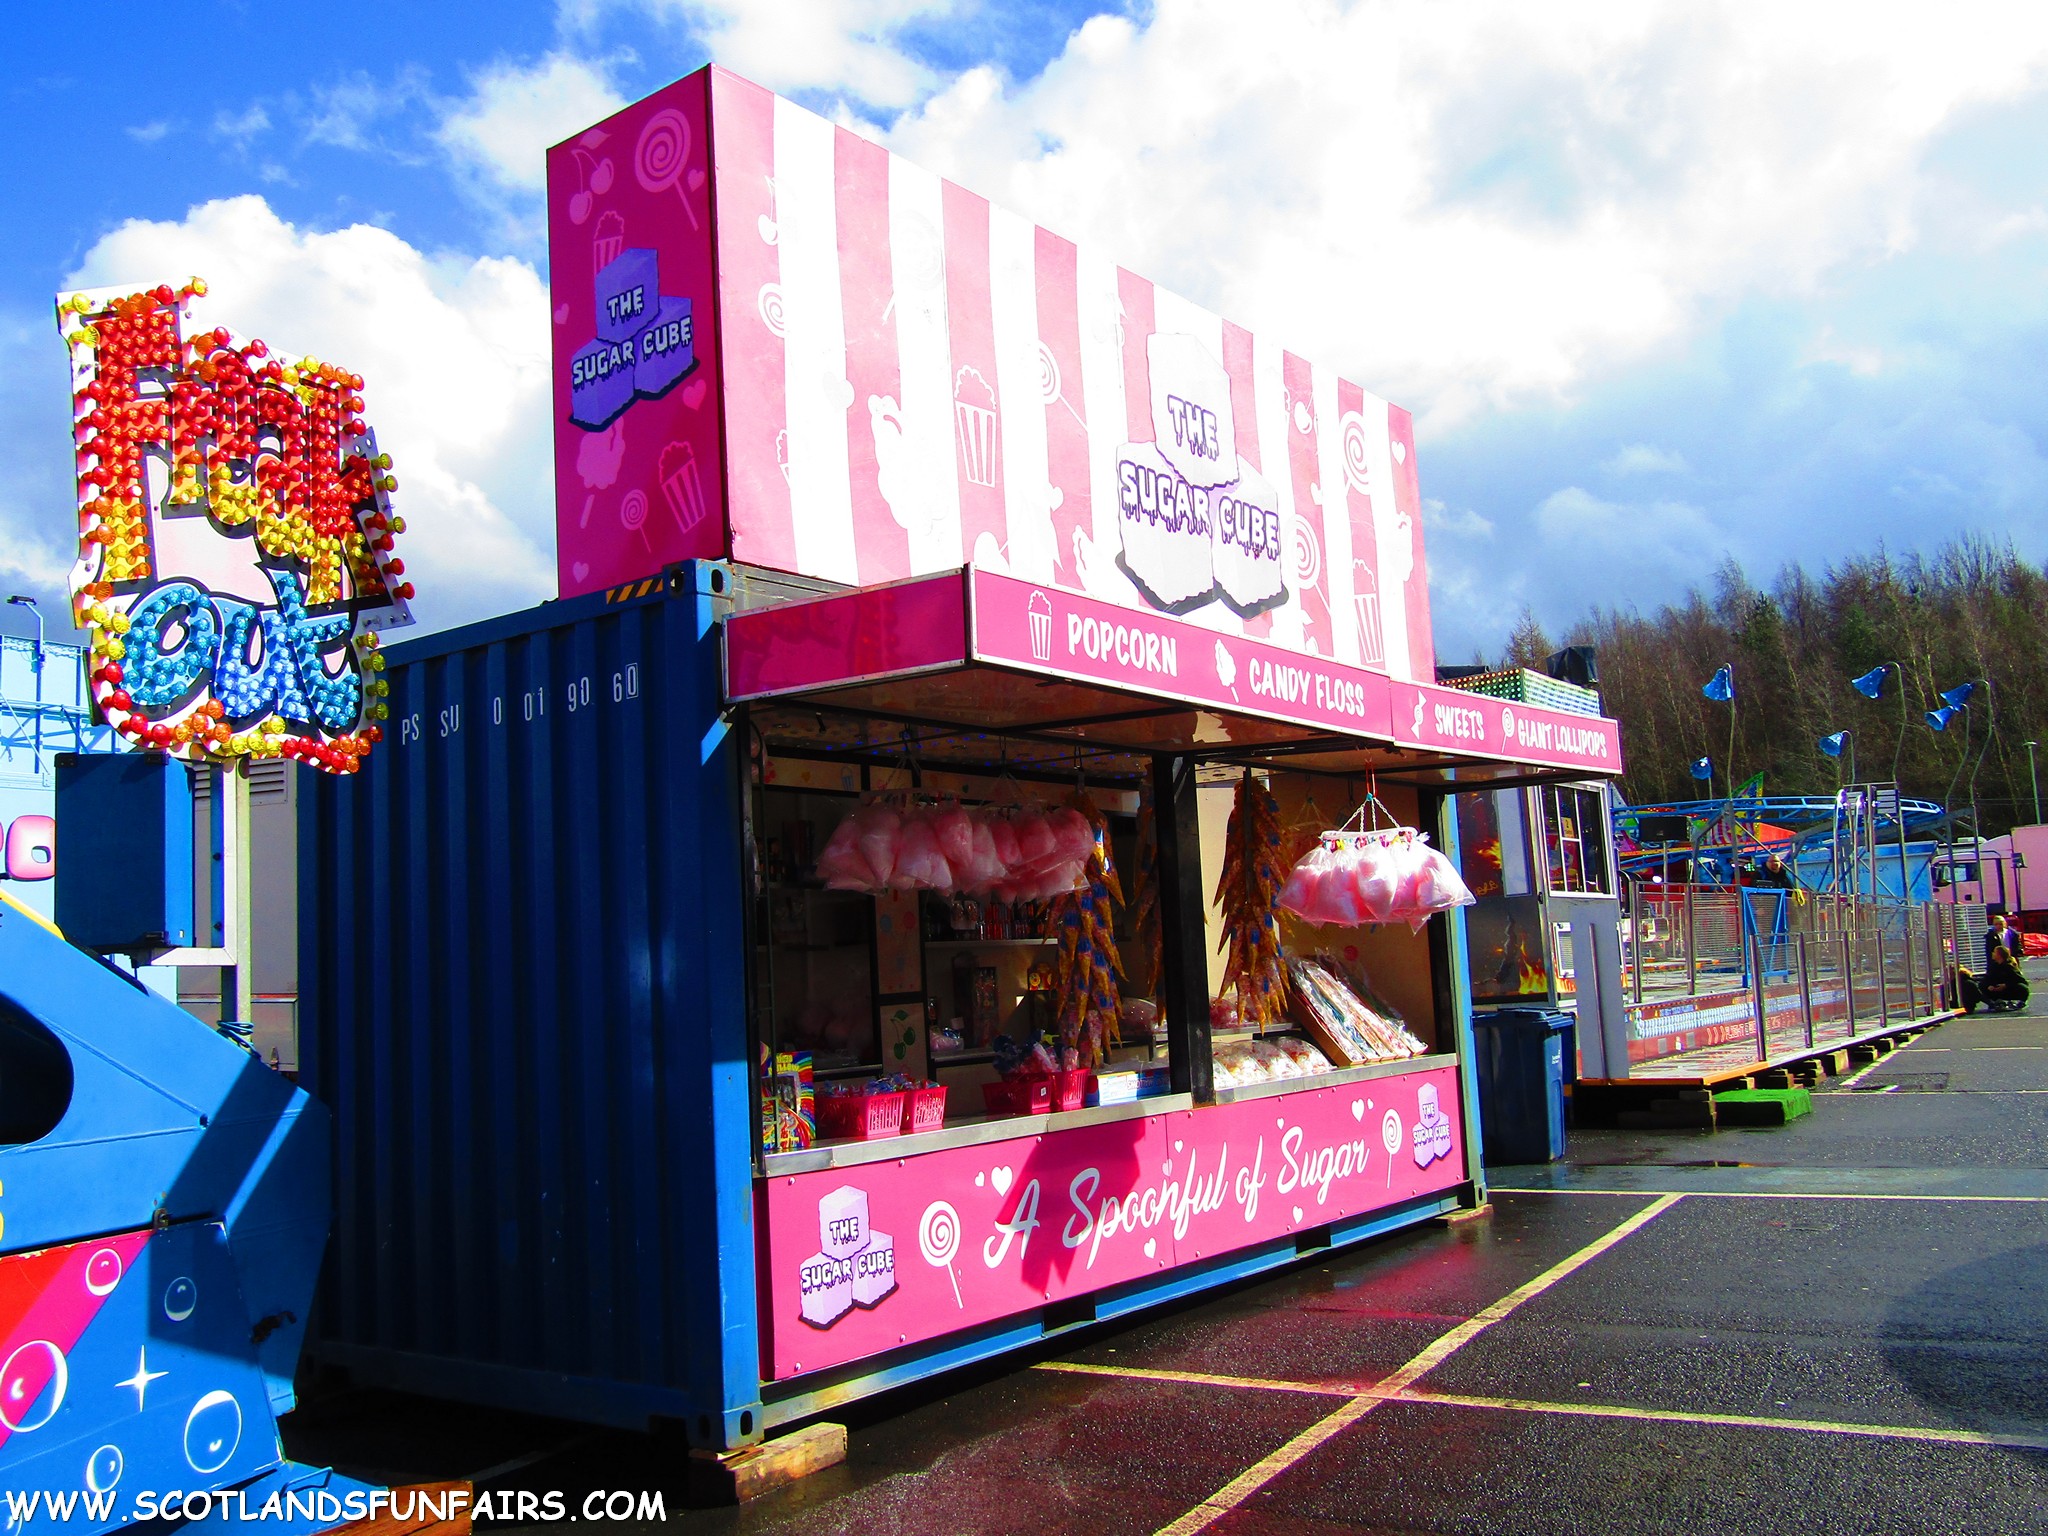 GEA's Sweets Stall